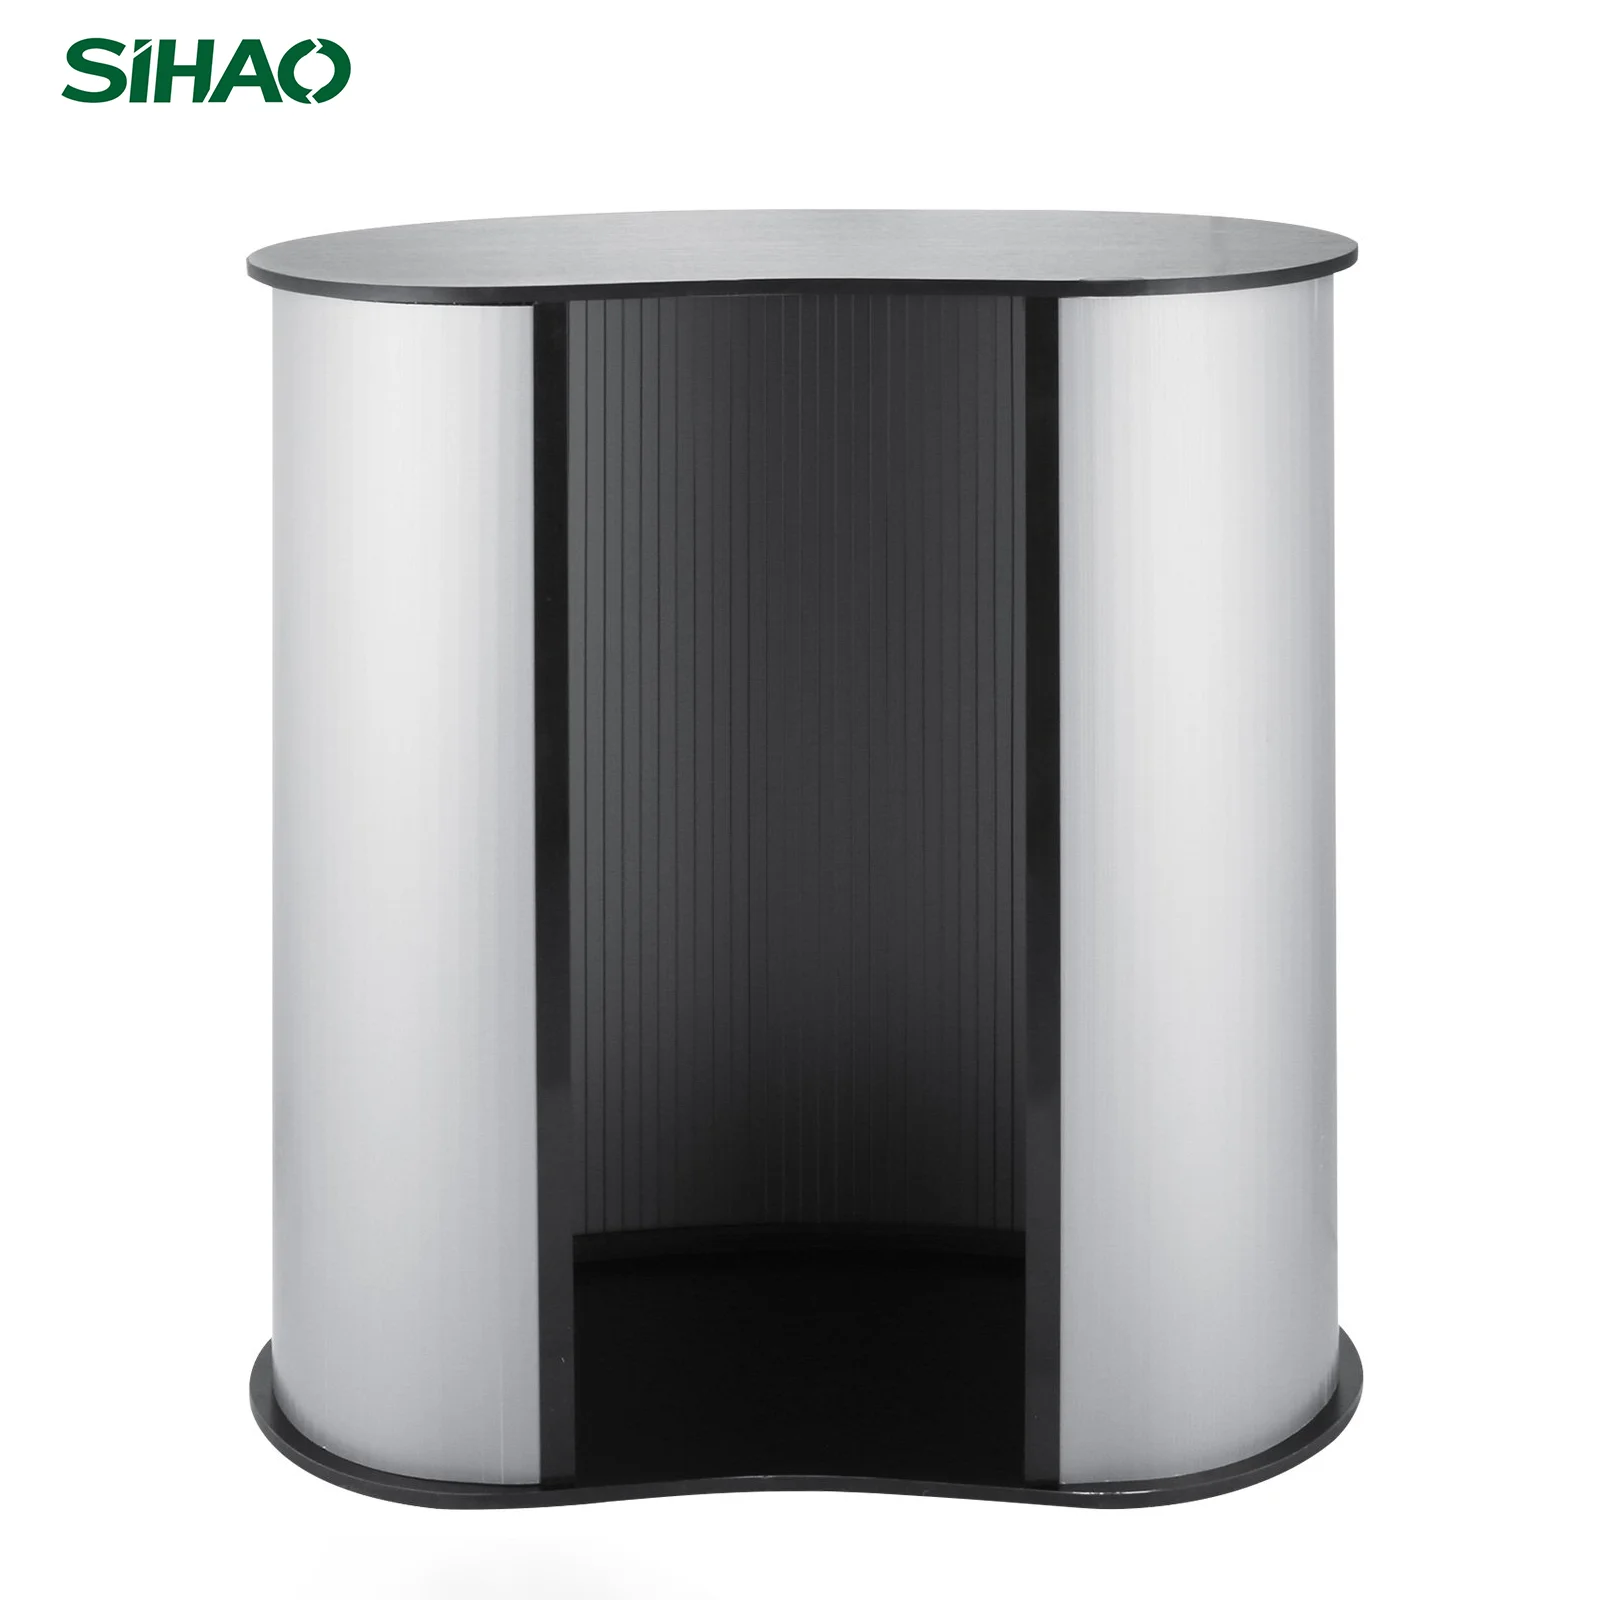 Sihao Show Display Podium Table Enamel Paint Tabletop With Built-in Self-adhesive Tape 2 Carrying Bag For Events Product Demos